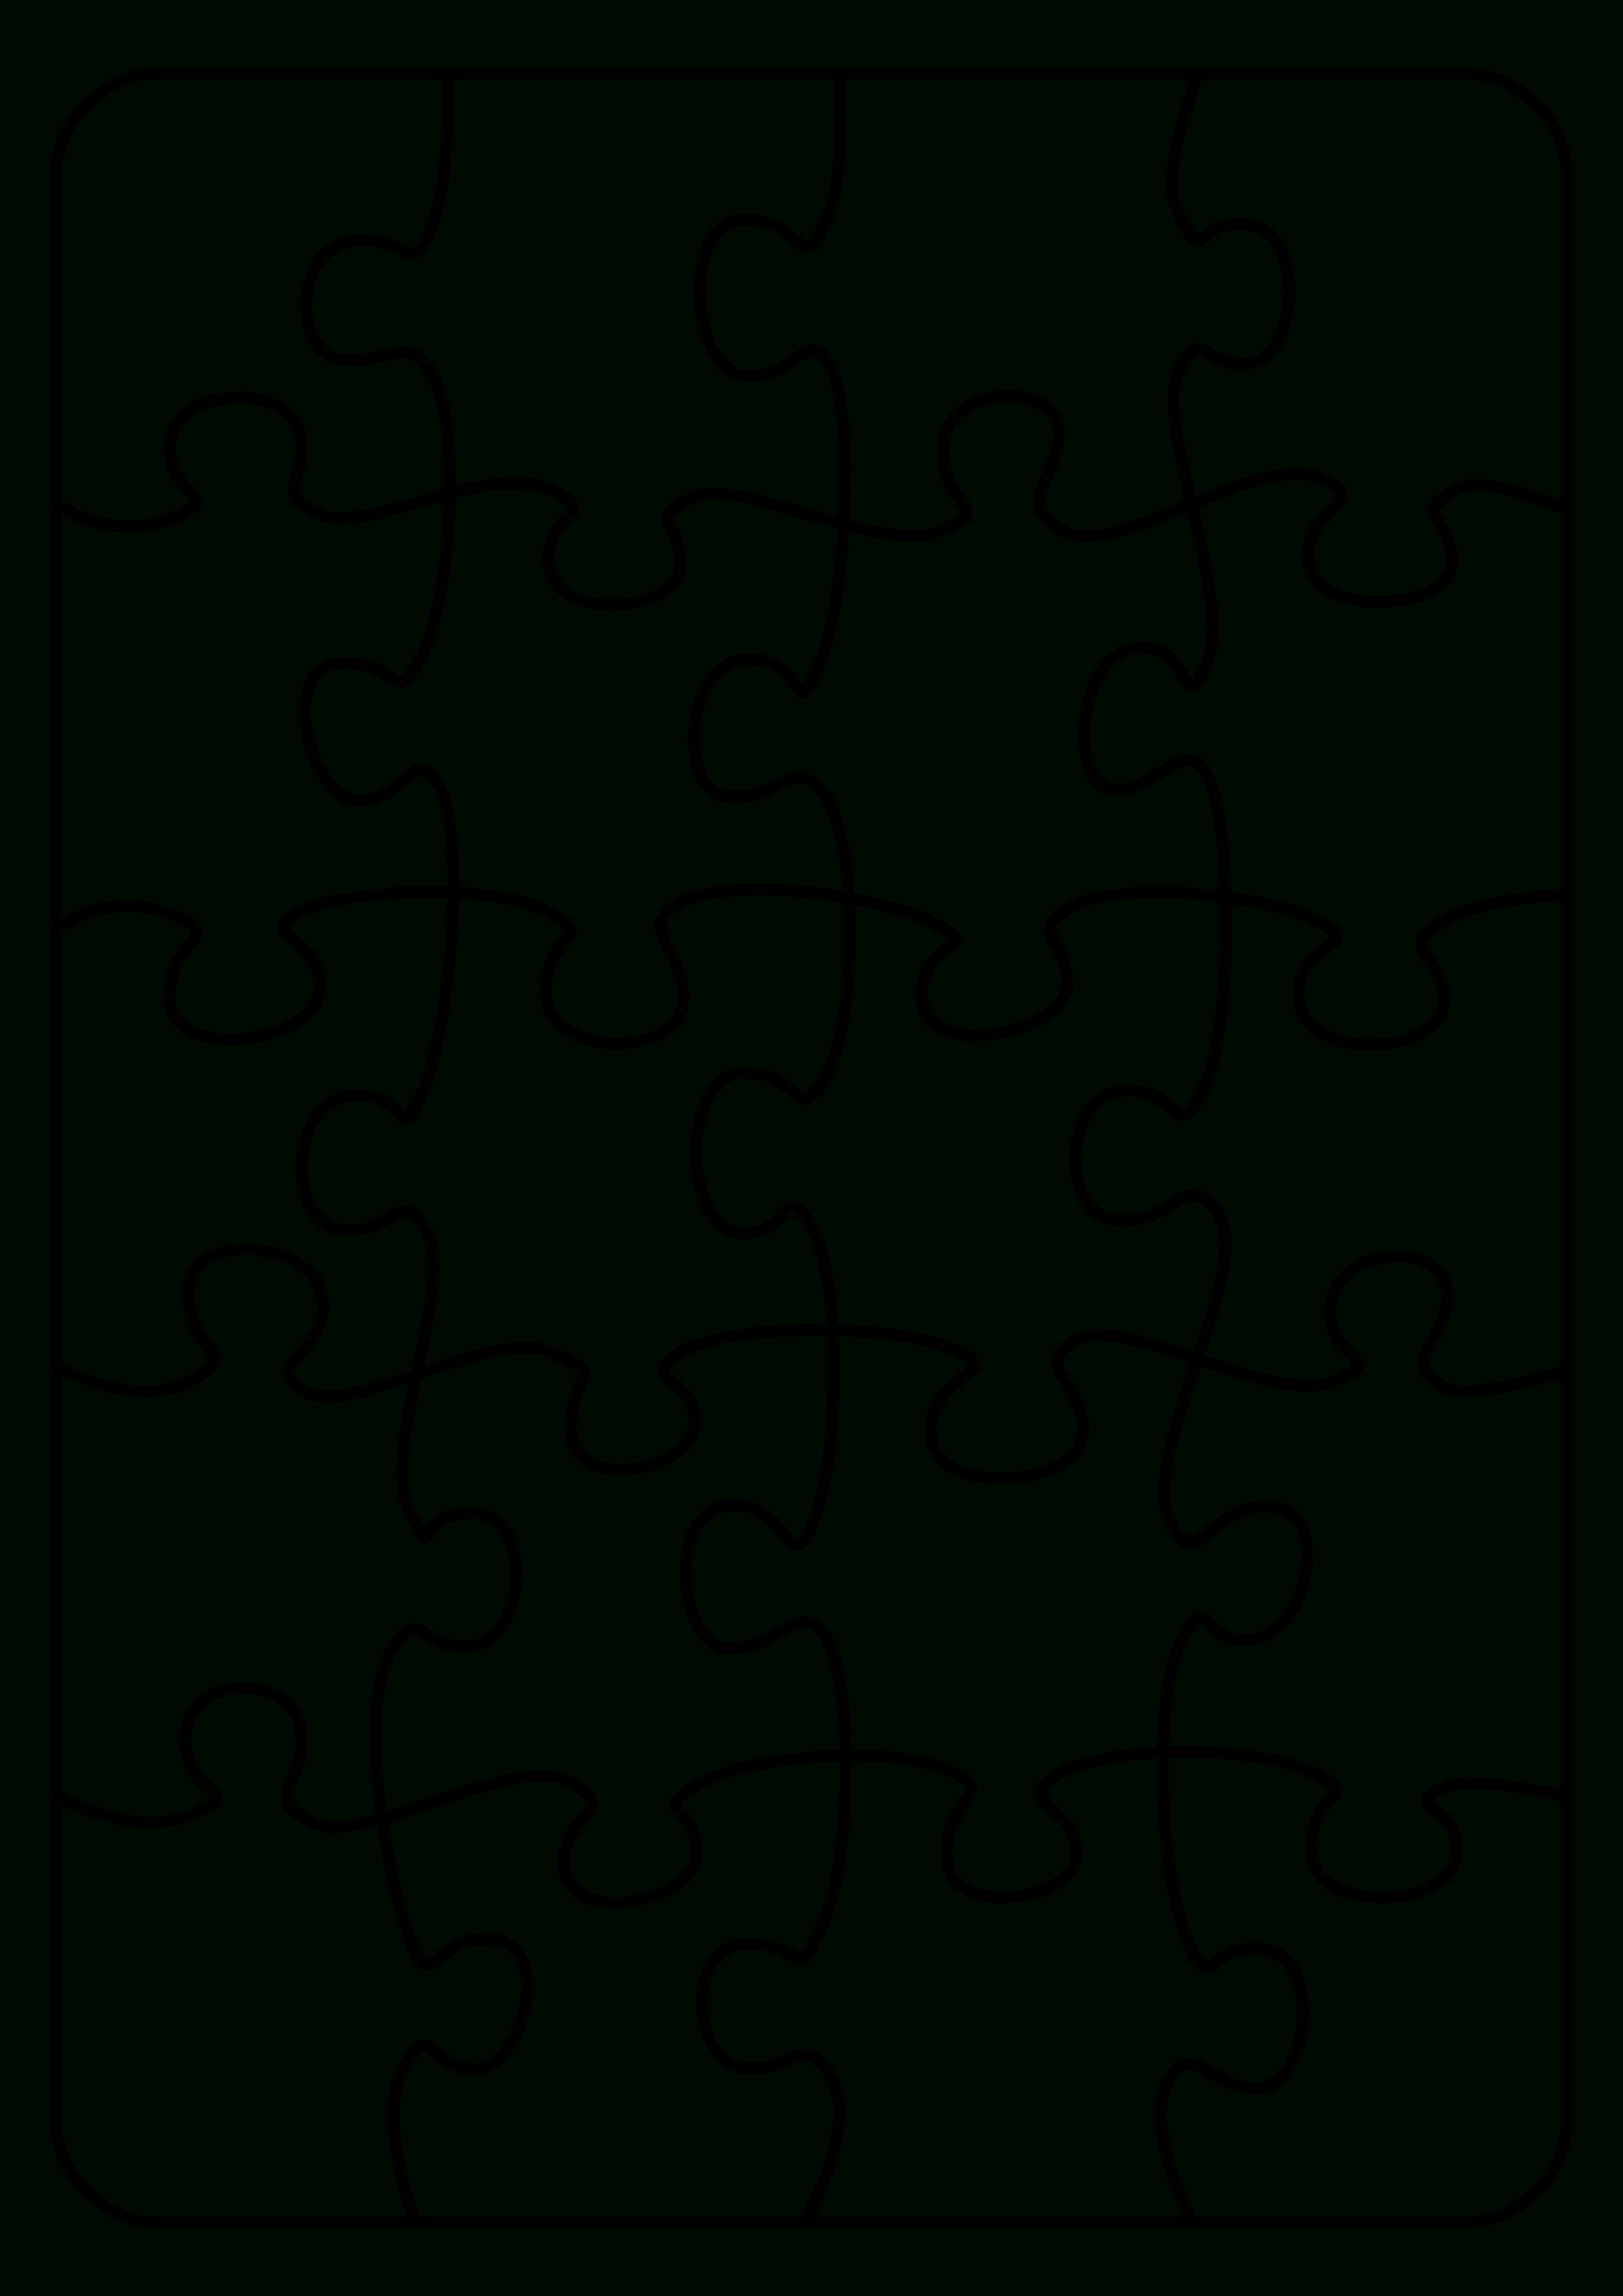 Jigsaw Puzzle Template. Endless Possibilities! Use With With Jigsaw Puzzle Template For Word